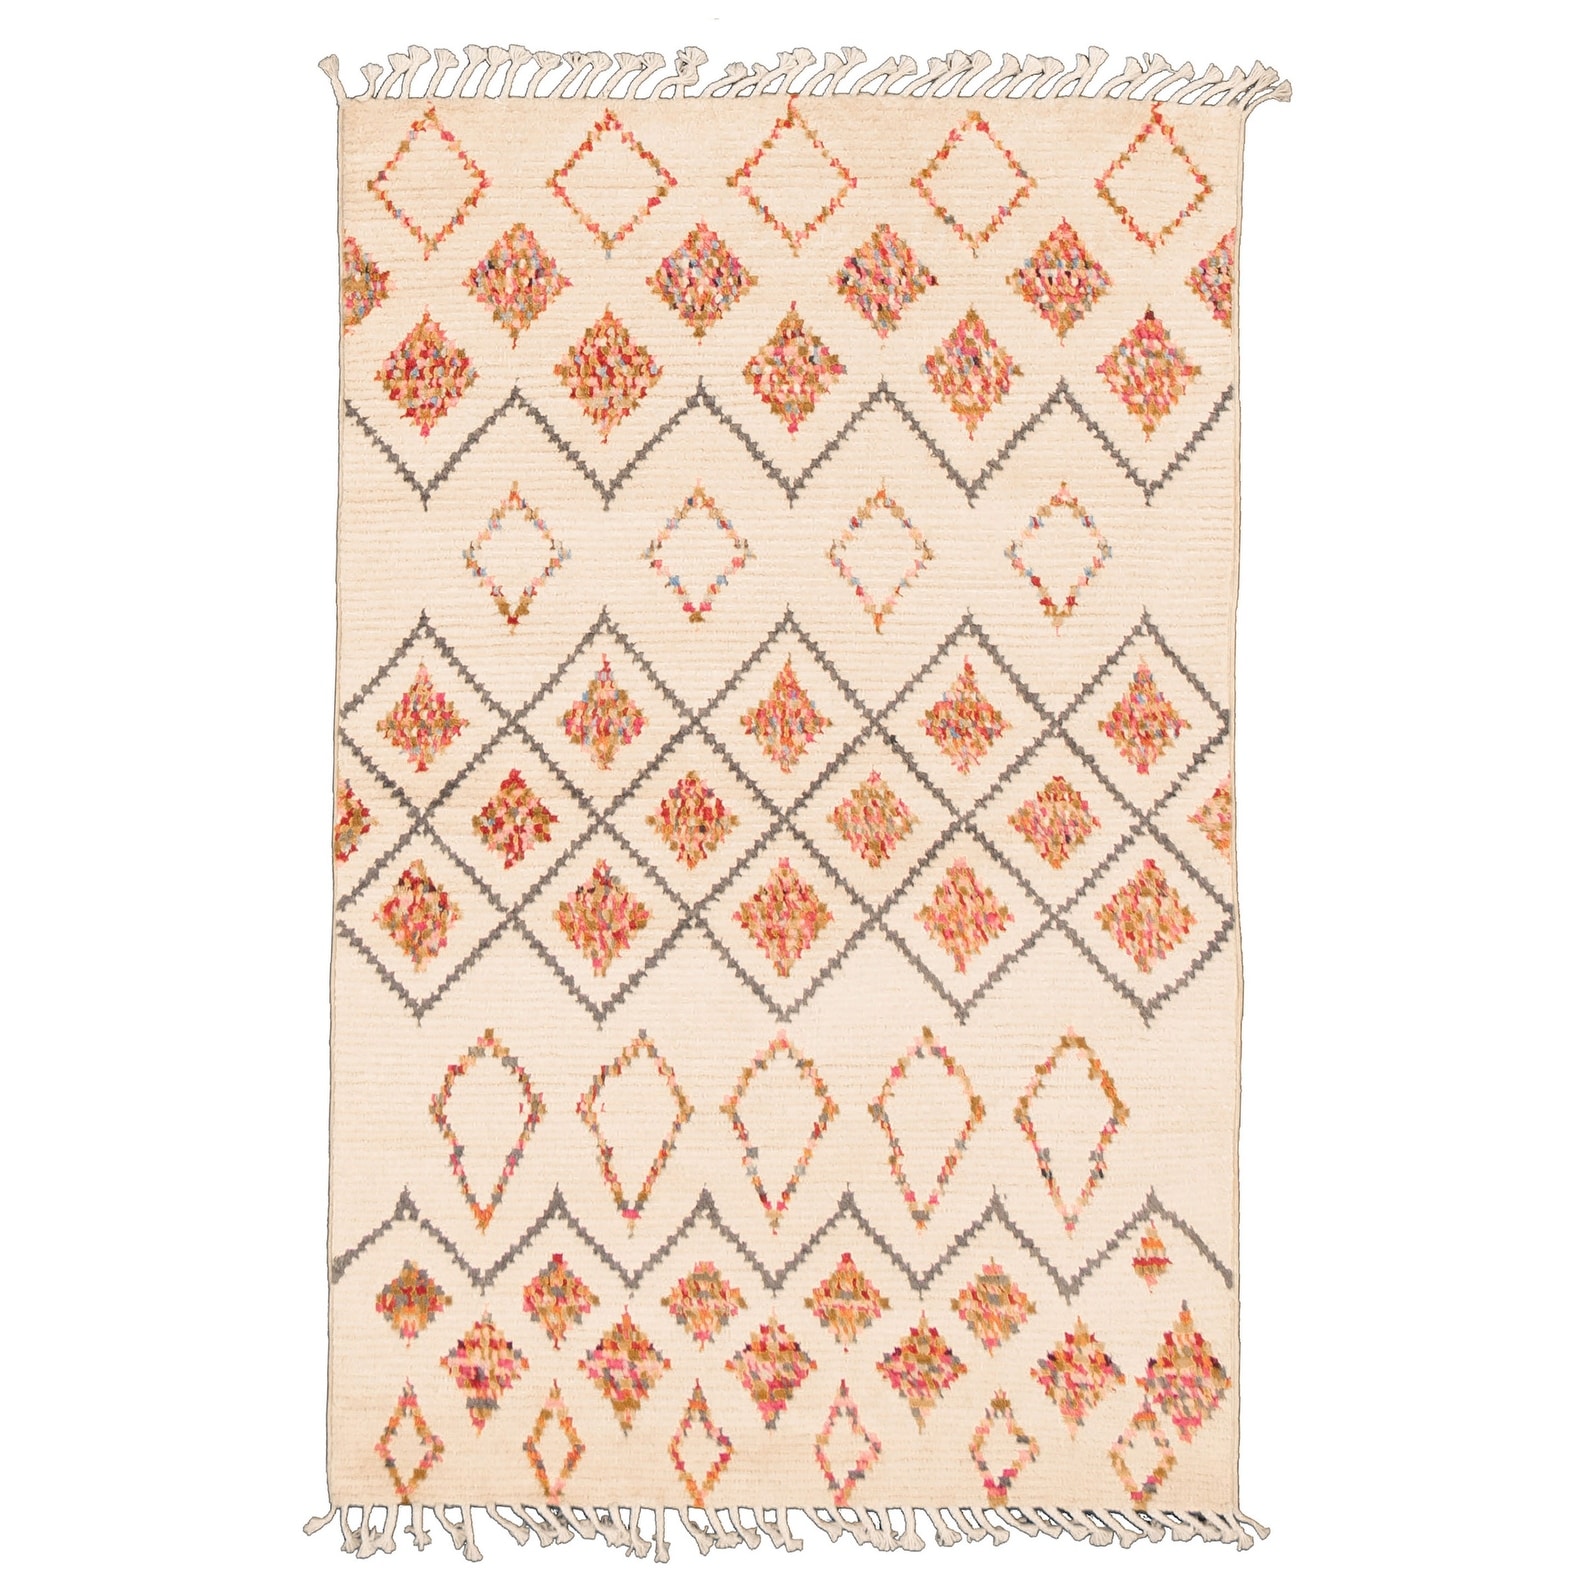 Hand-Knotted Wool Rug 339874 eCarpet Gallery Area Rug for Living Room Pak Finest Marrakesh Moroccan Ivory Rug 6'0 x 8'9 Bedroom 